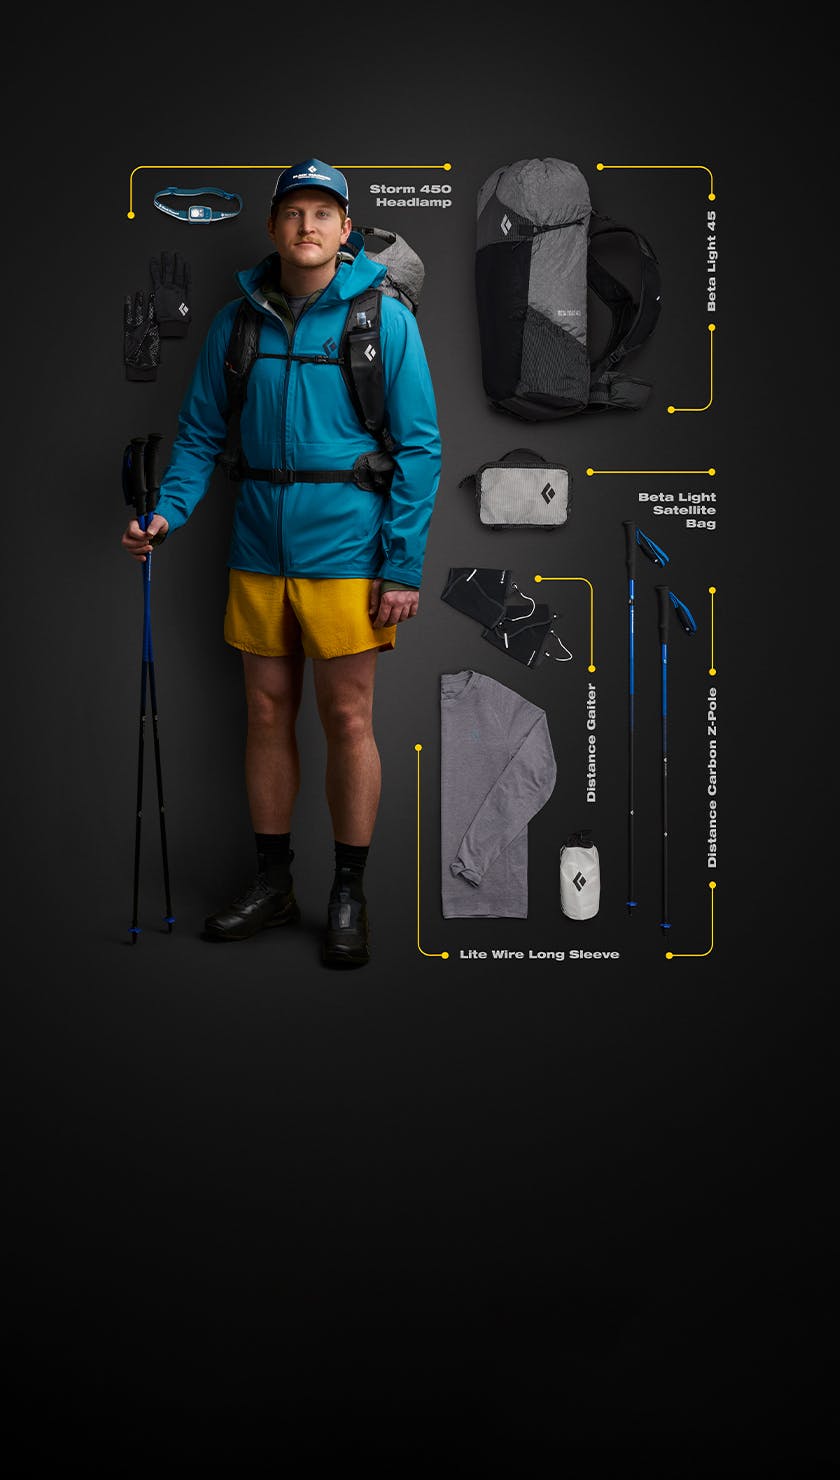 The fastpacking kit